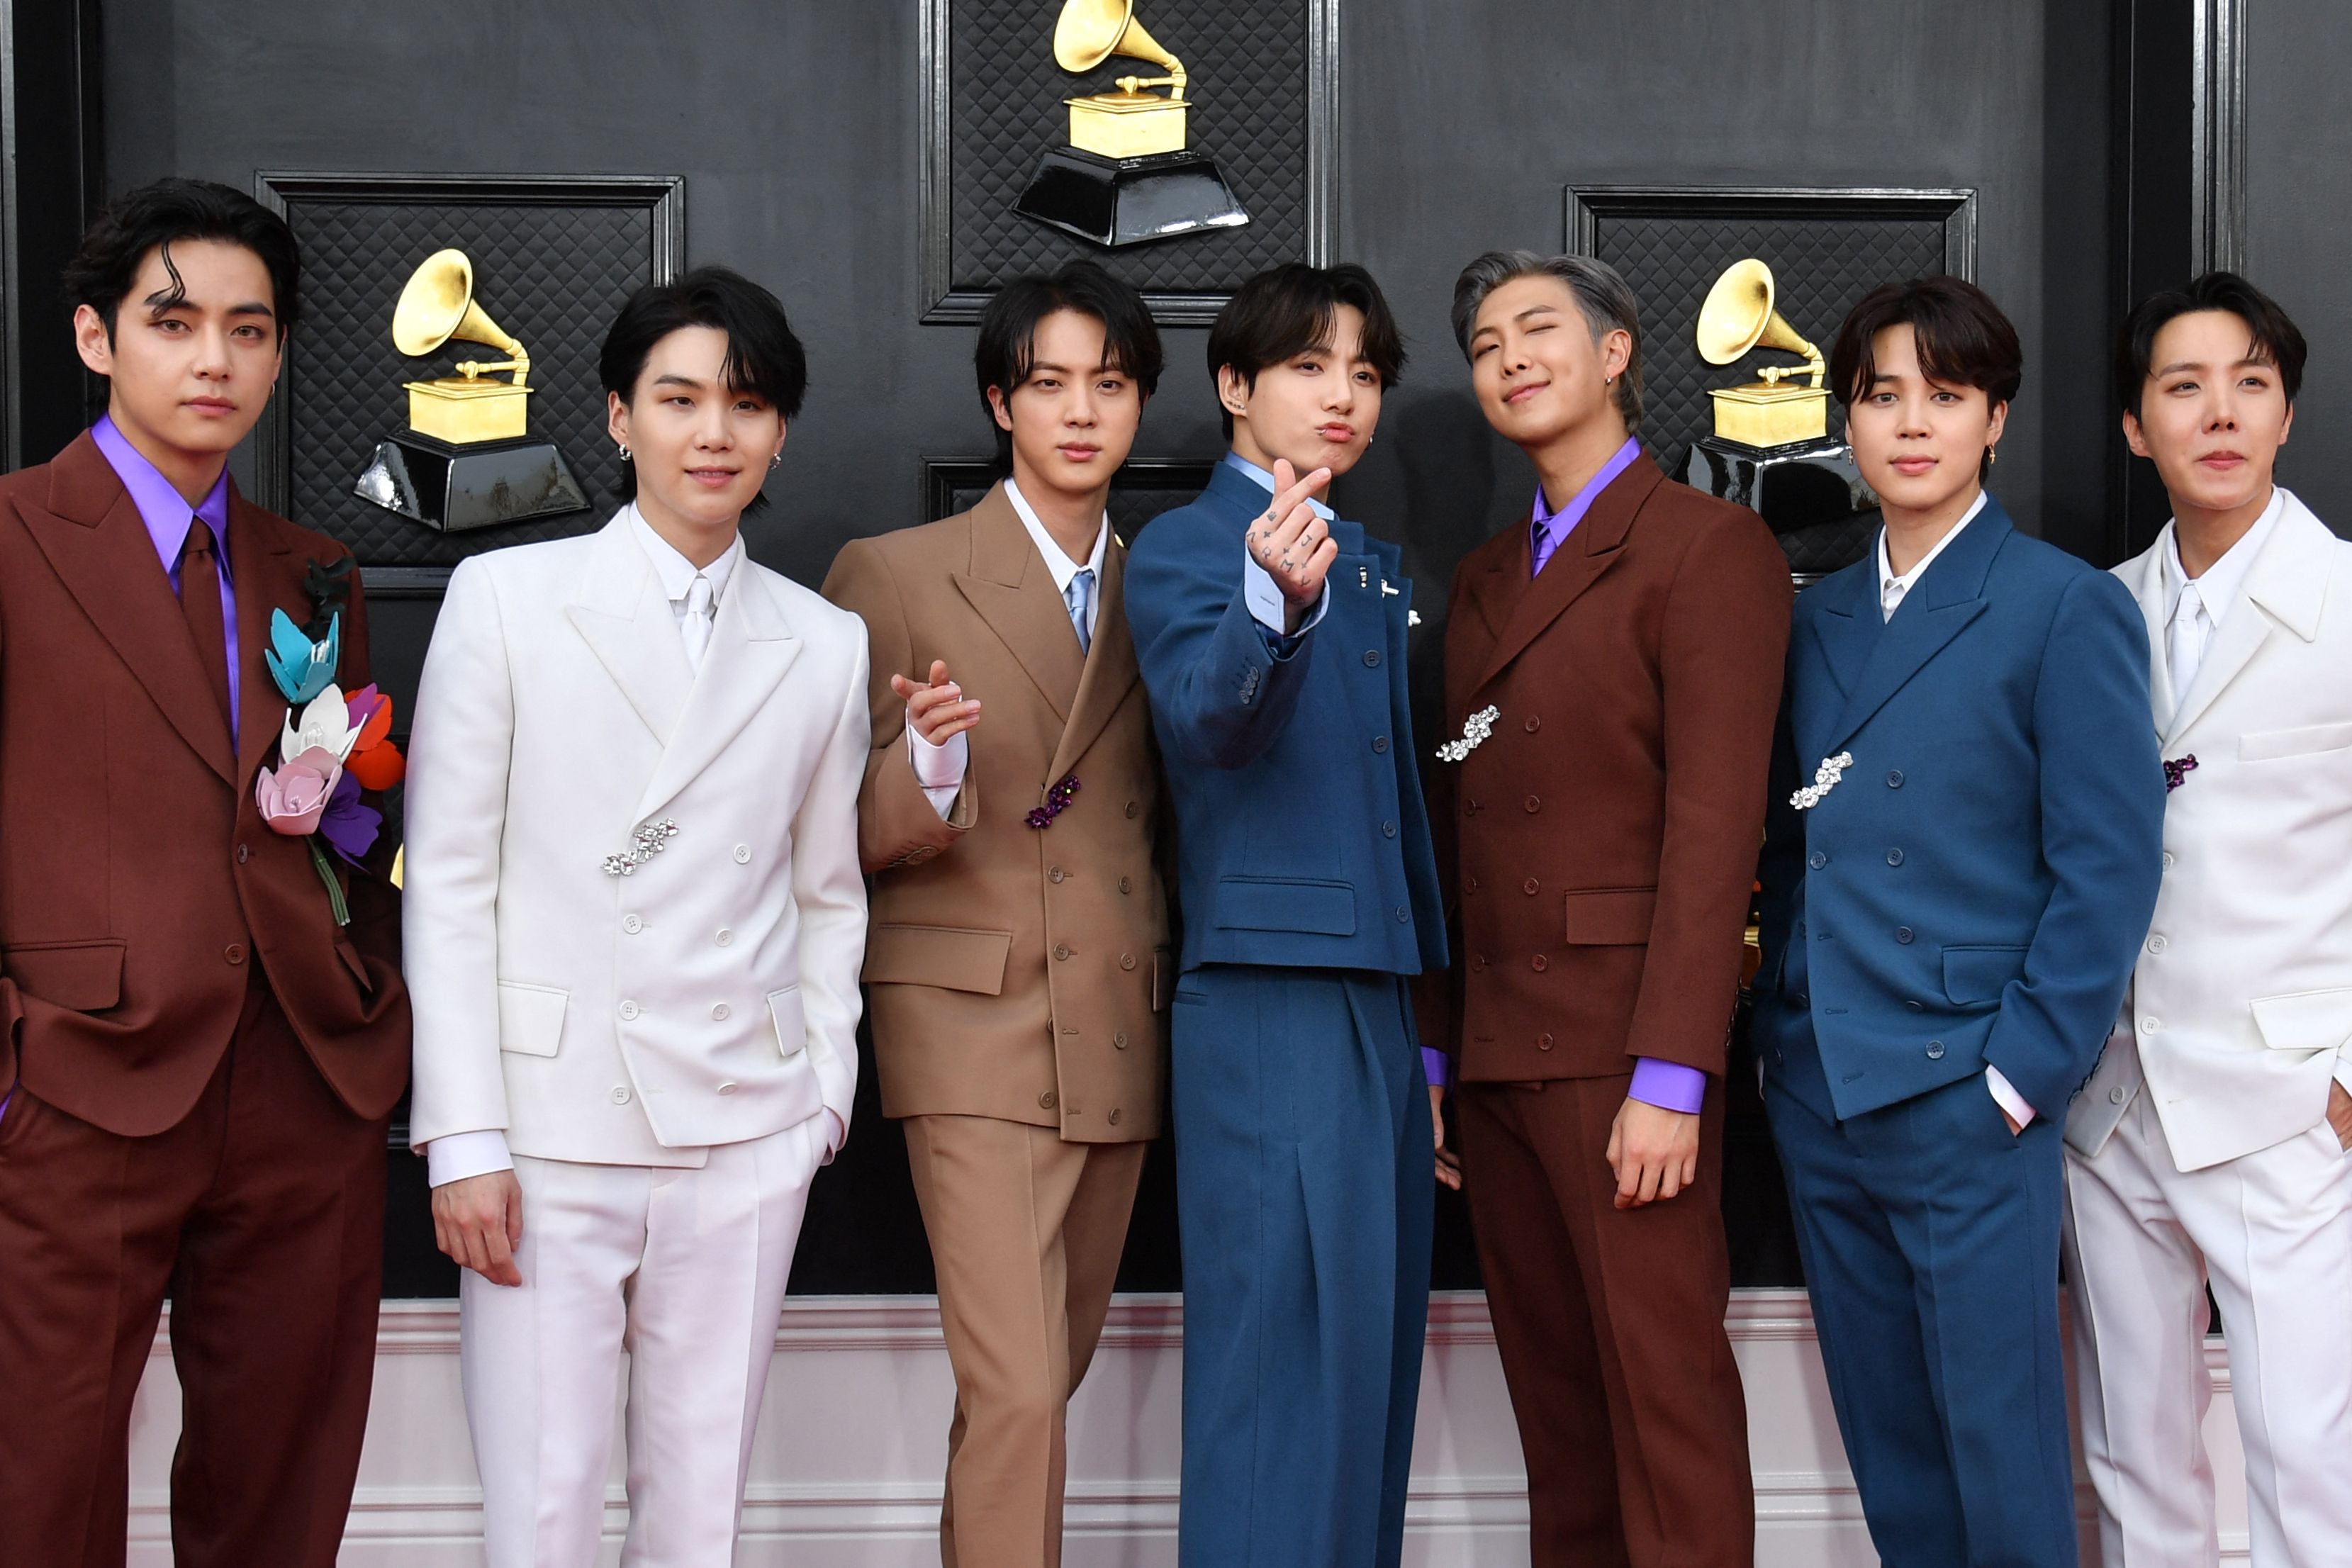 South Korean boy band BTS arrives for the 64th Annual Grammy Awards at the MGM Grand Garden Arena in Las Vegas on 3 April 2022